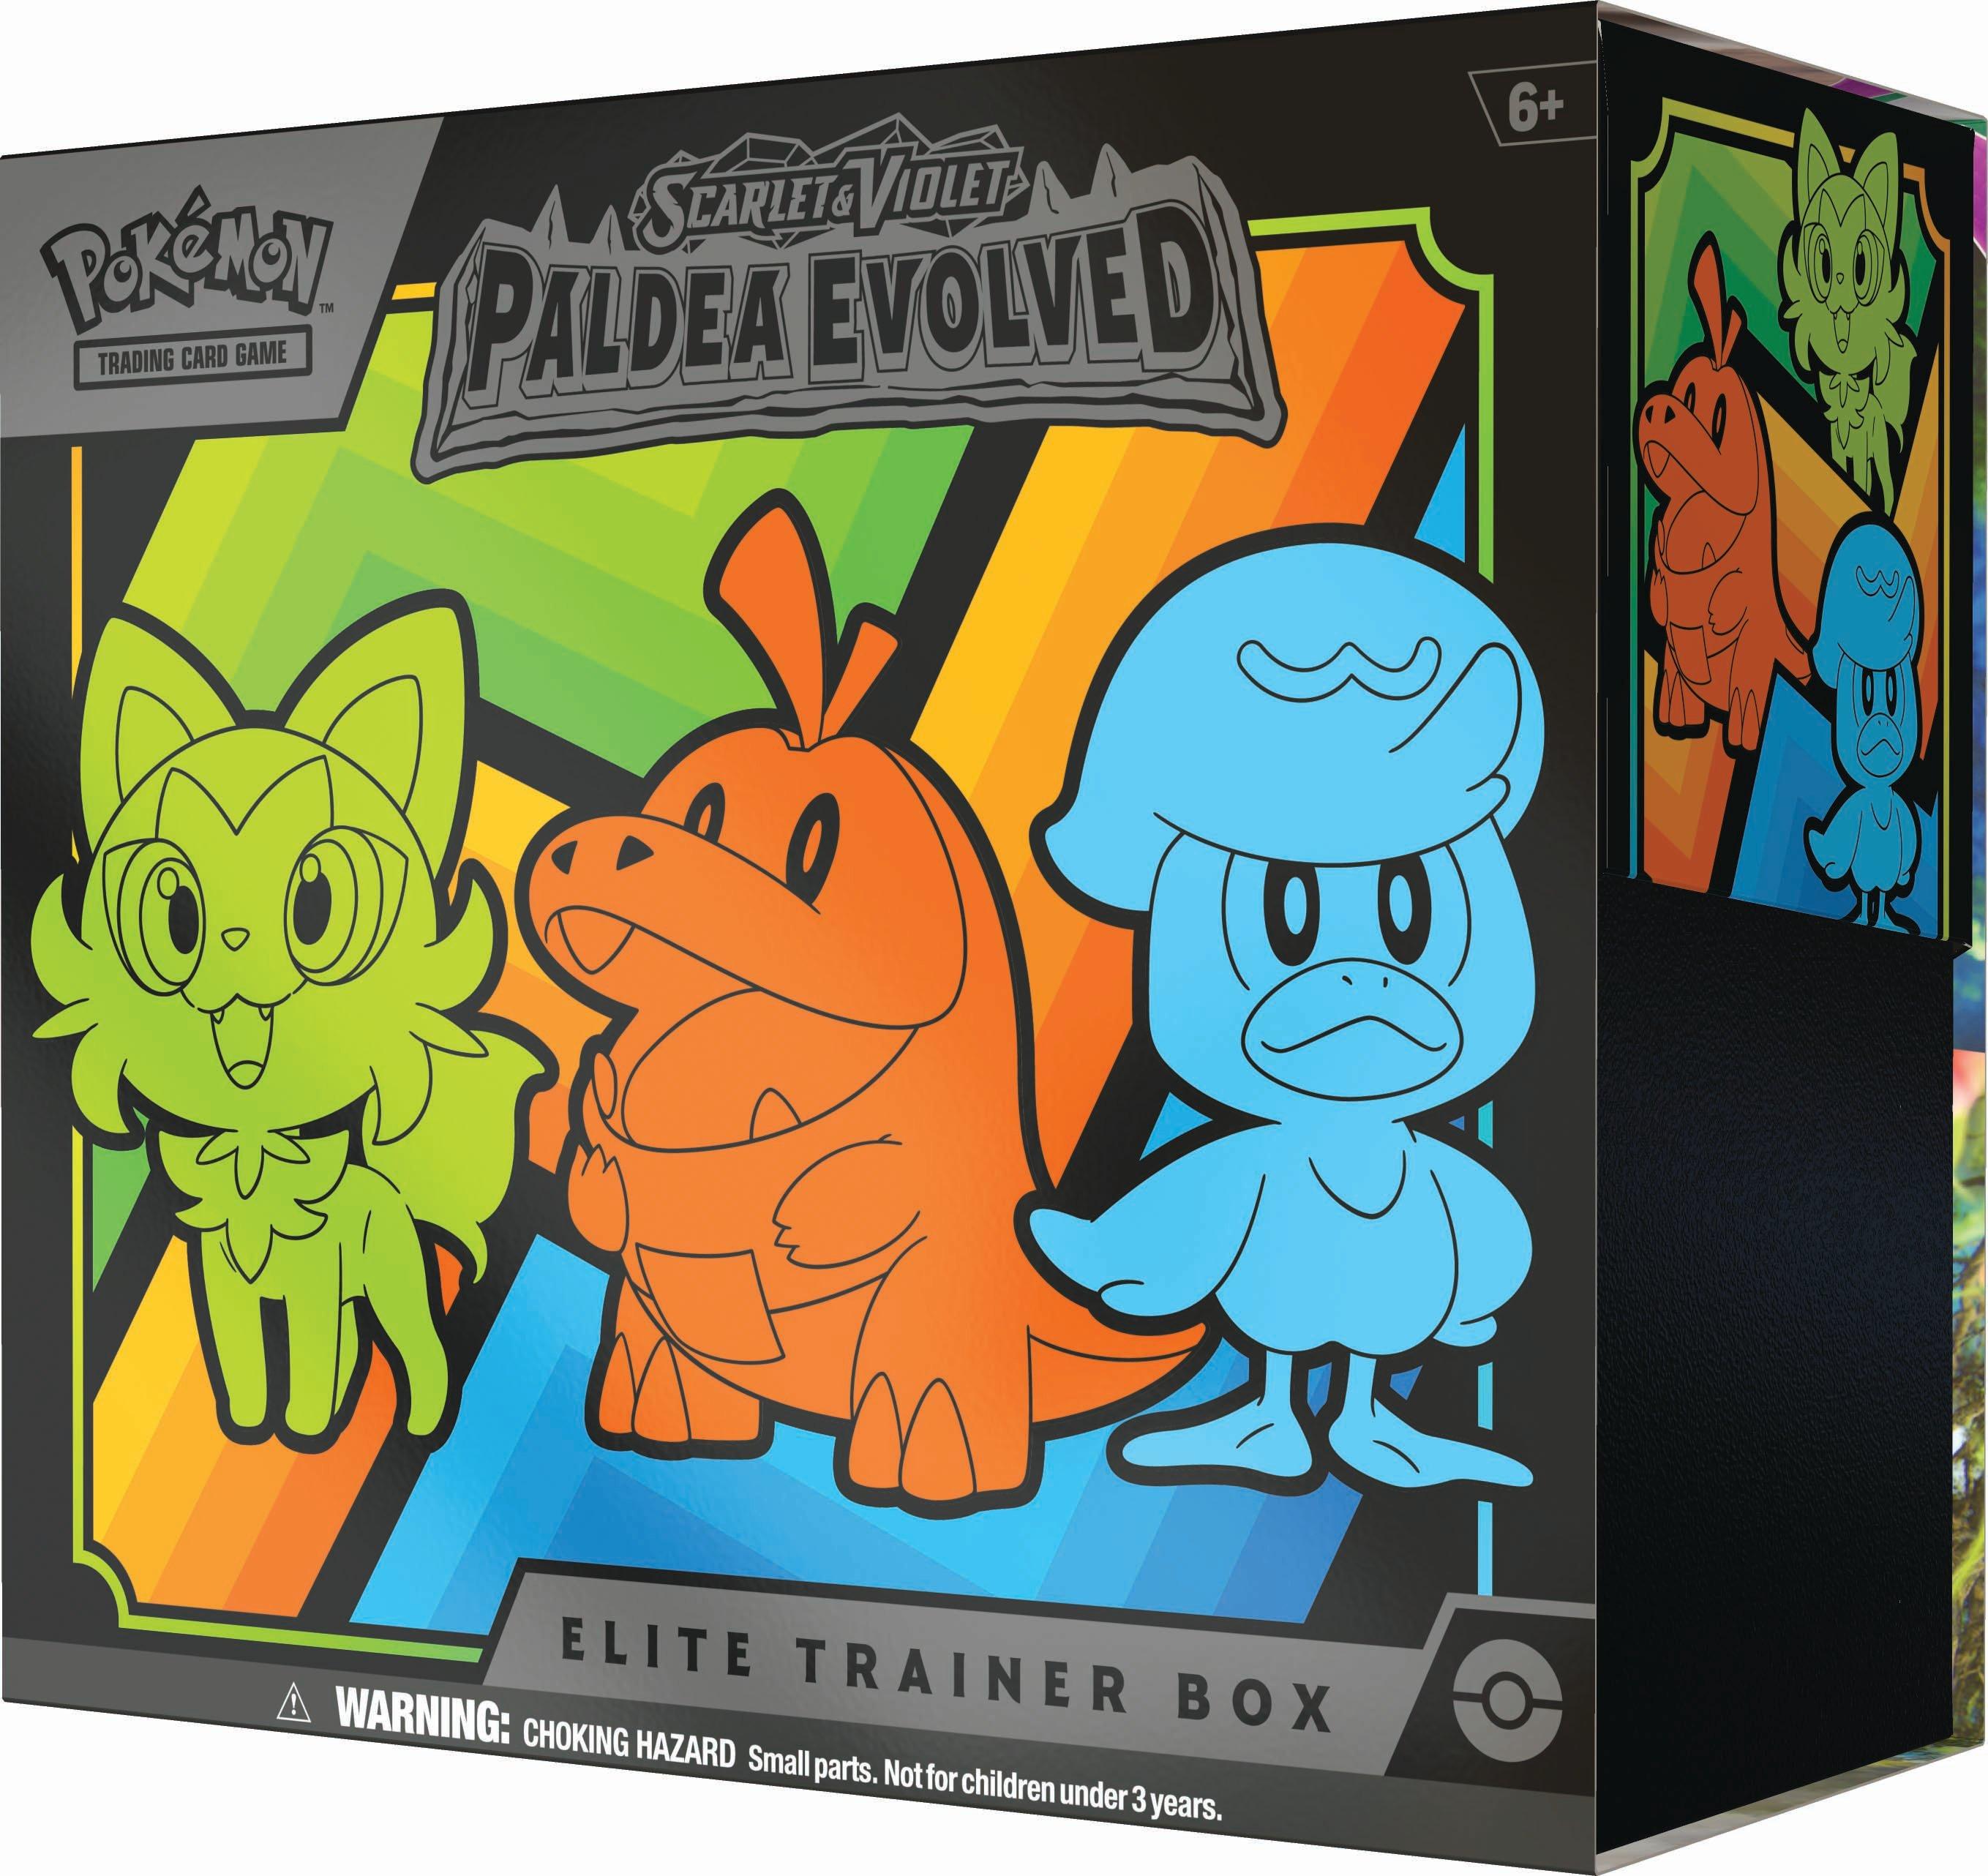 A Little mini review of the new 151 Elite Trainer Box! Lots of